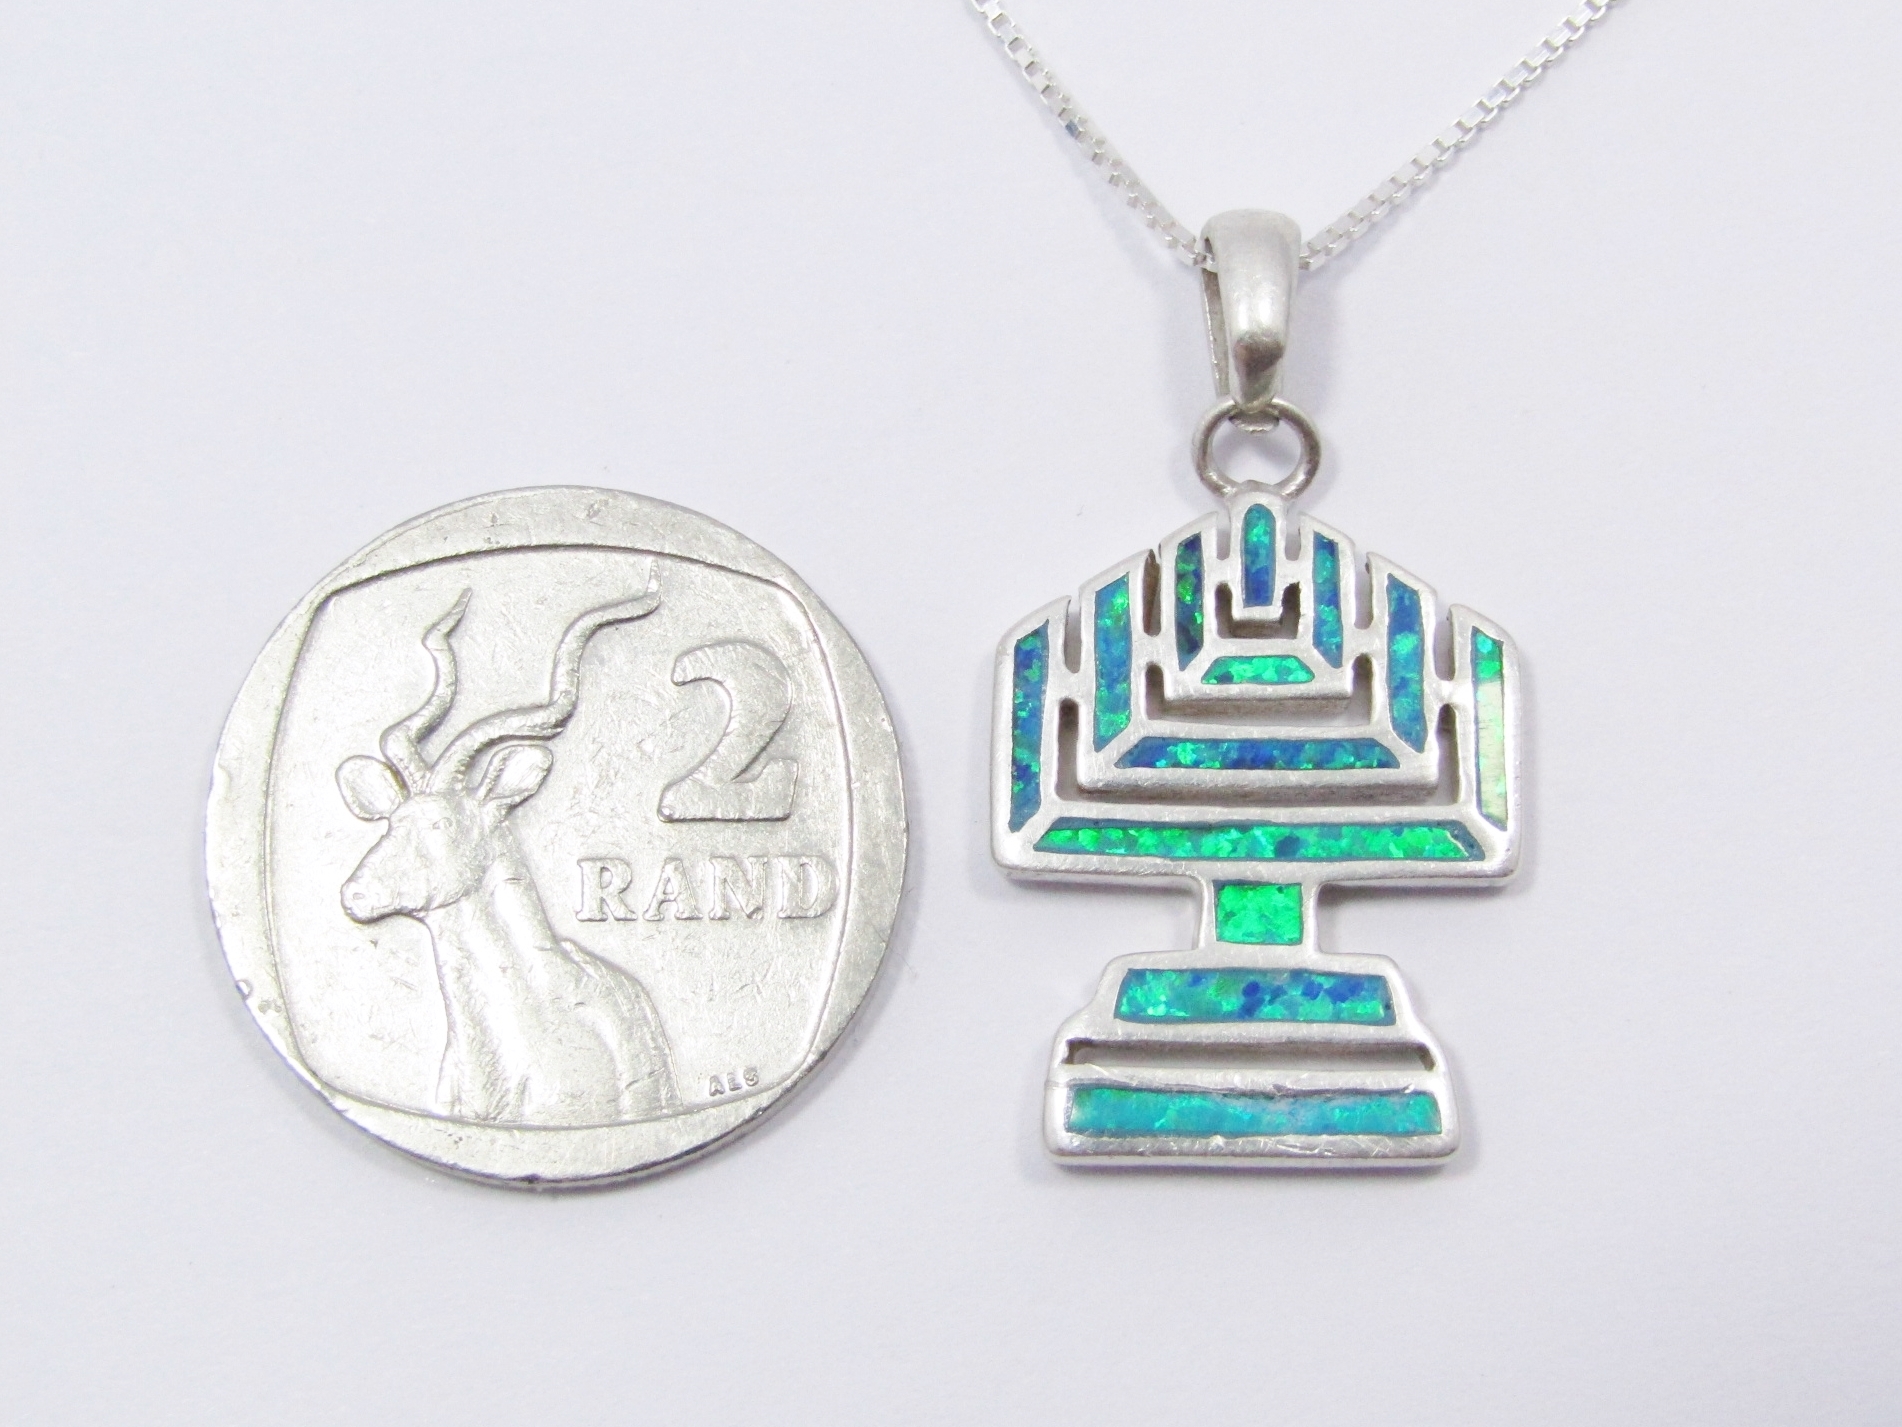 A Lovely Faux Opal Menorah Candle Pendant On Chain in Sterling Silver